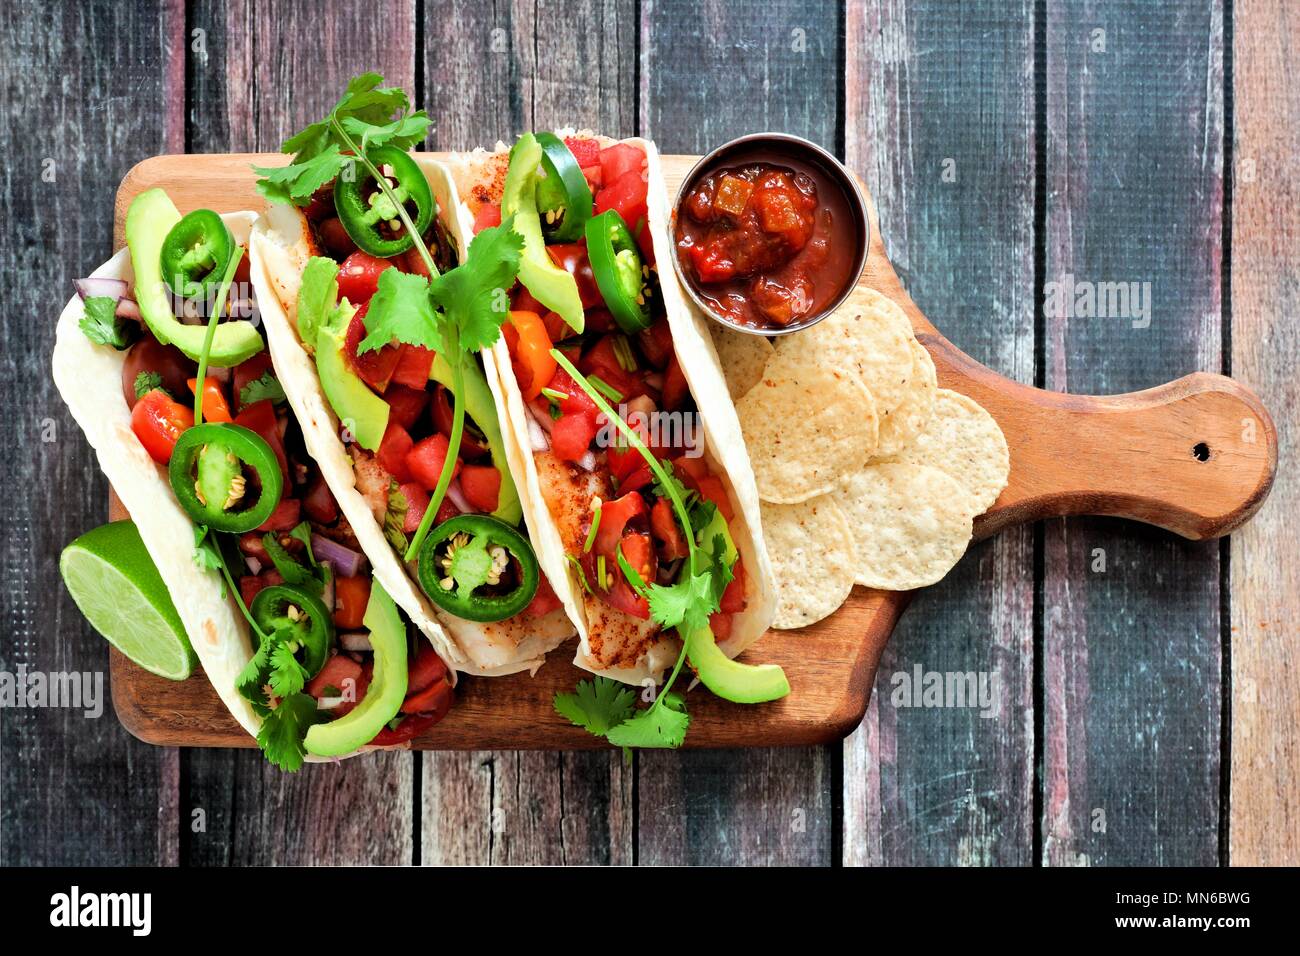 Spicy fish tacos with watermelon salsa and avocados on a paddle board against a rustic wood background Stock Photo